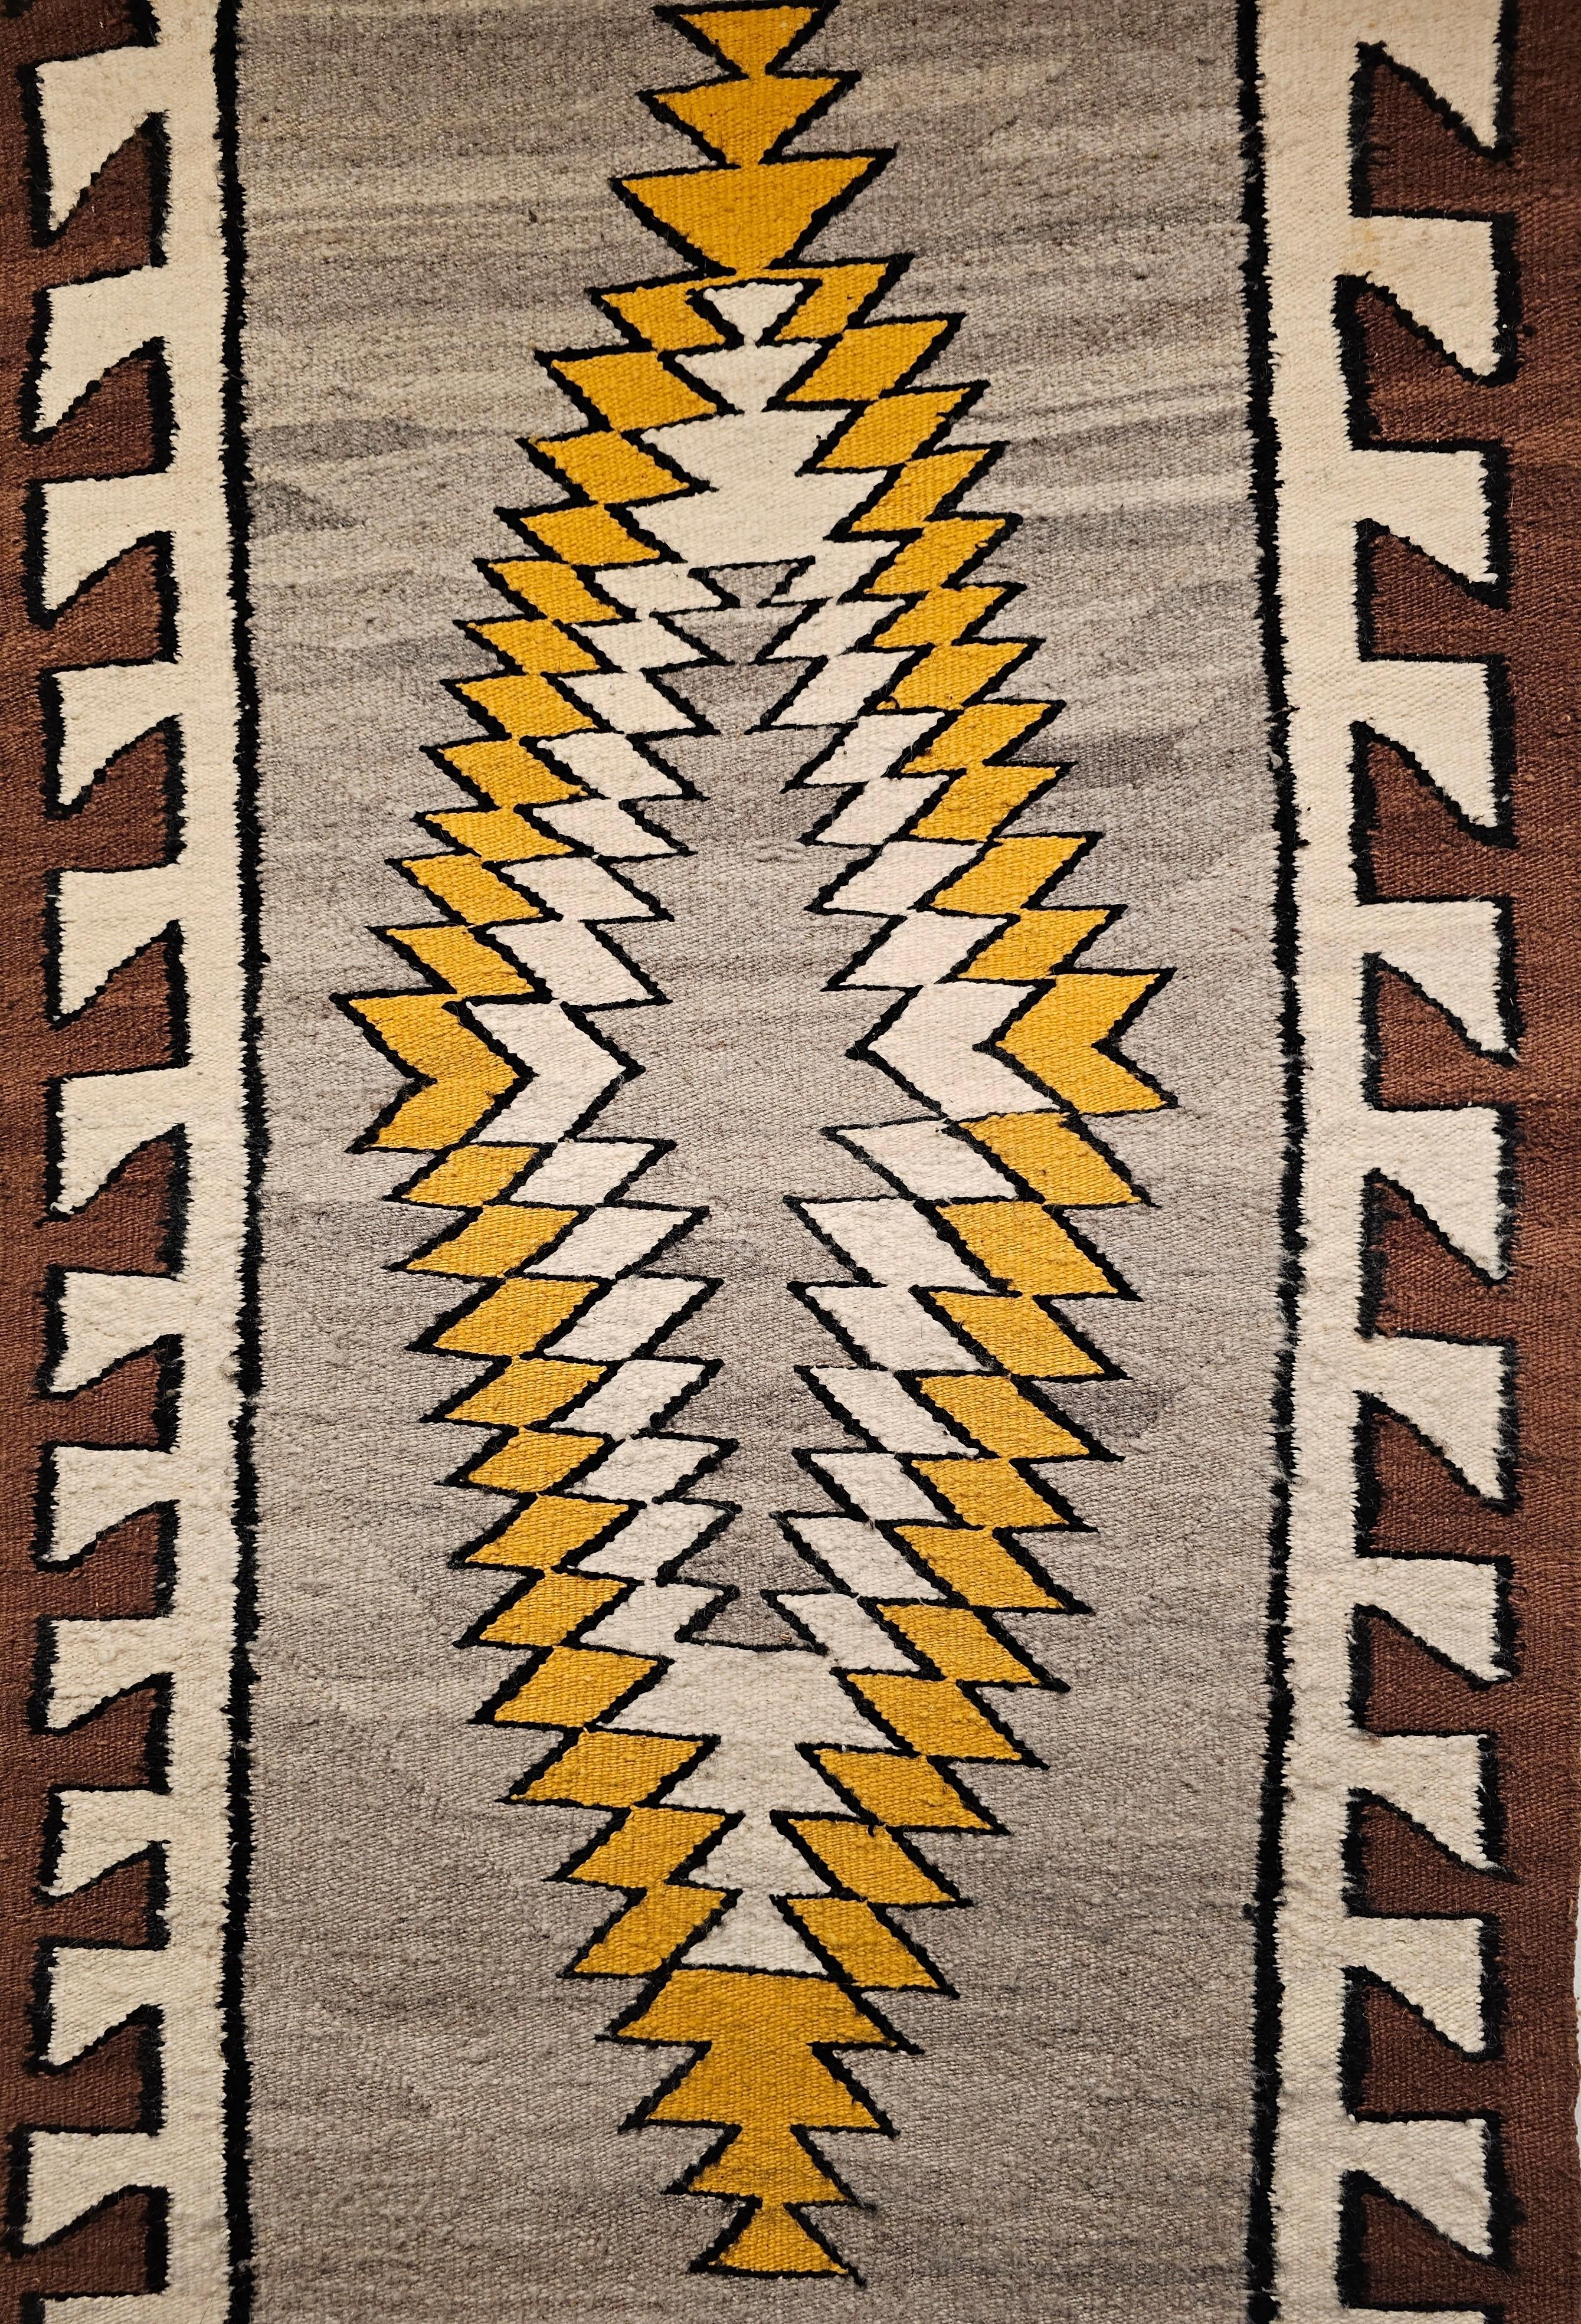 A beautiful Navajo area rug from the SW United States from the first half of the 1900s. The Navajo rug has a striking concentric triple medallion design in yellow, ivory and gray set on a silver gray background with a brown and ivory border framing